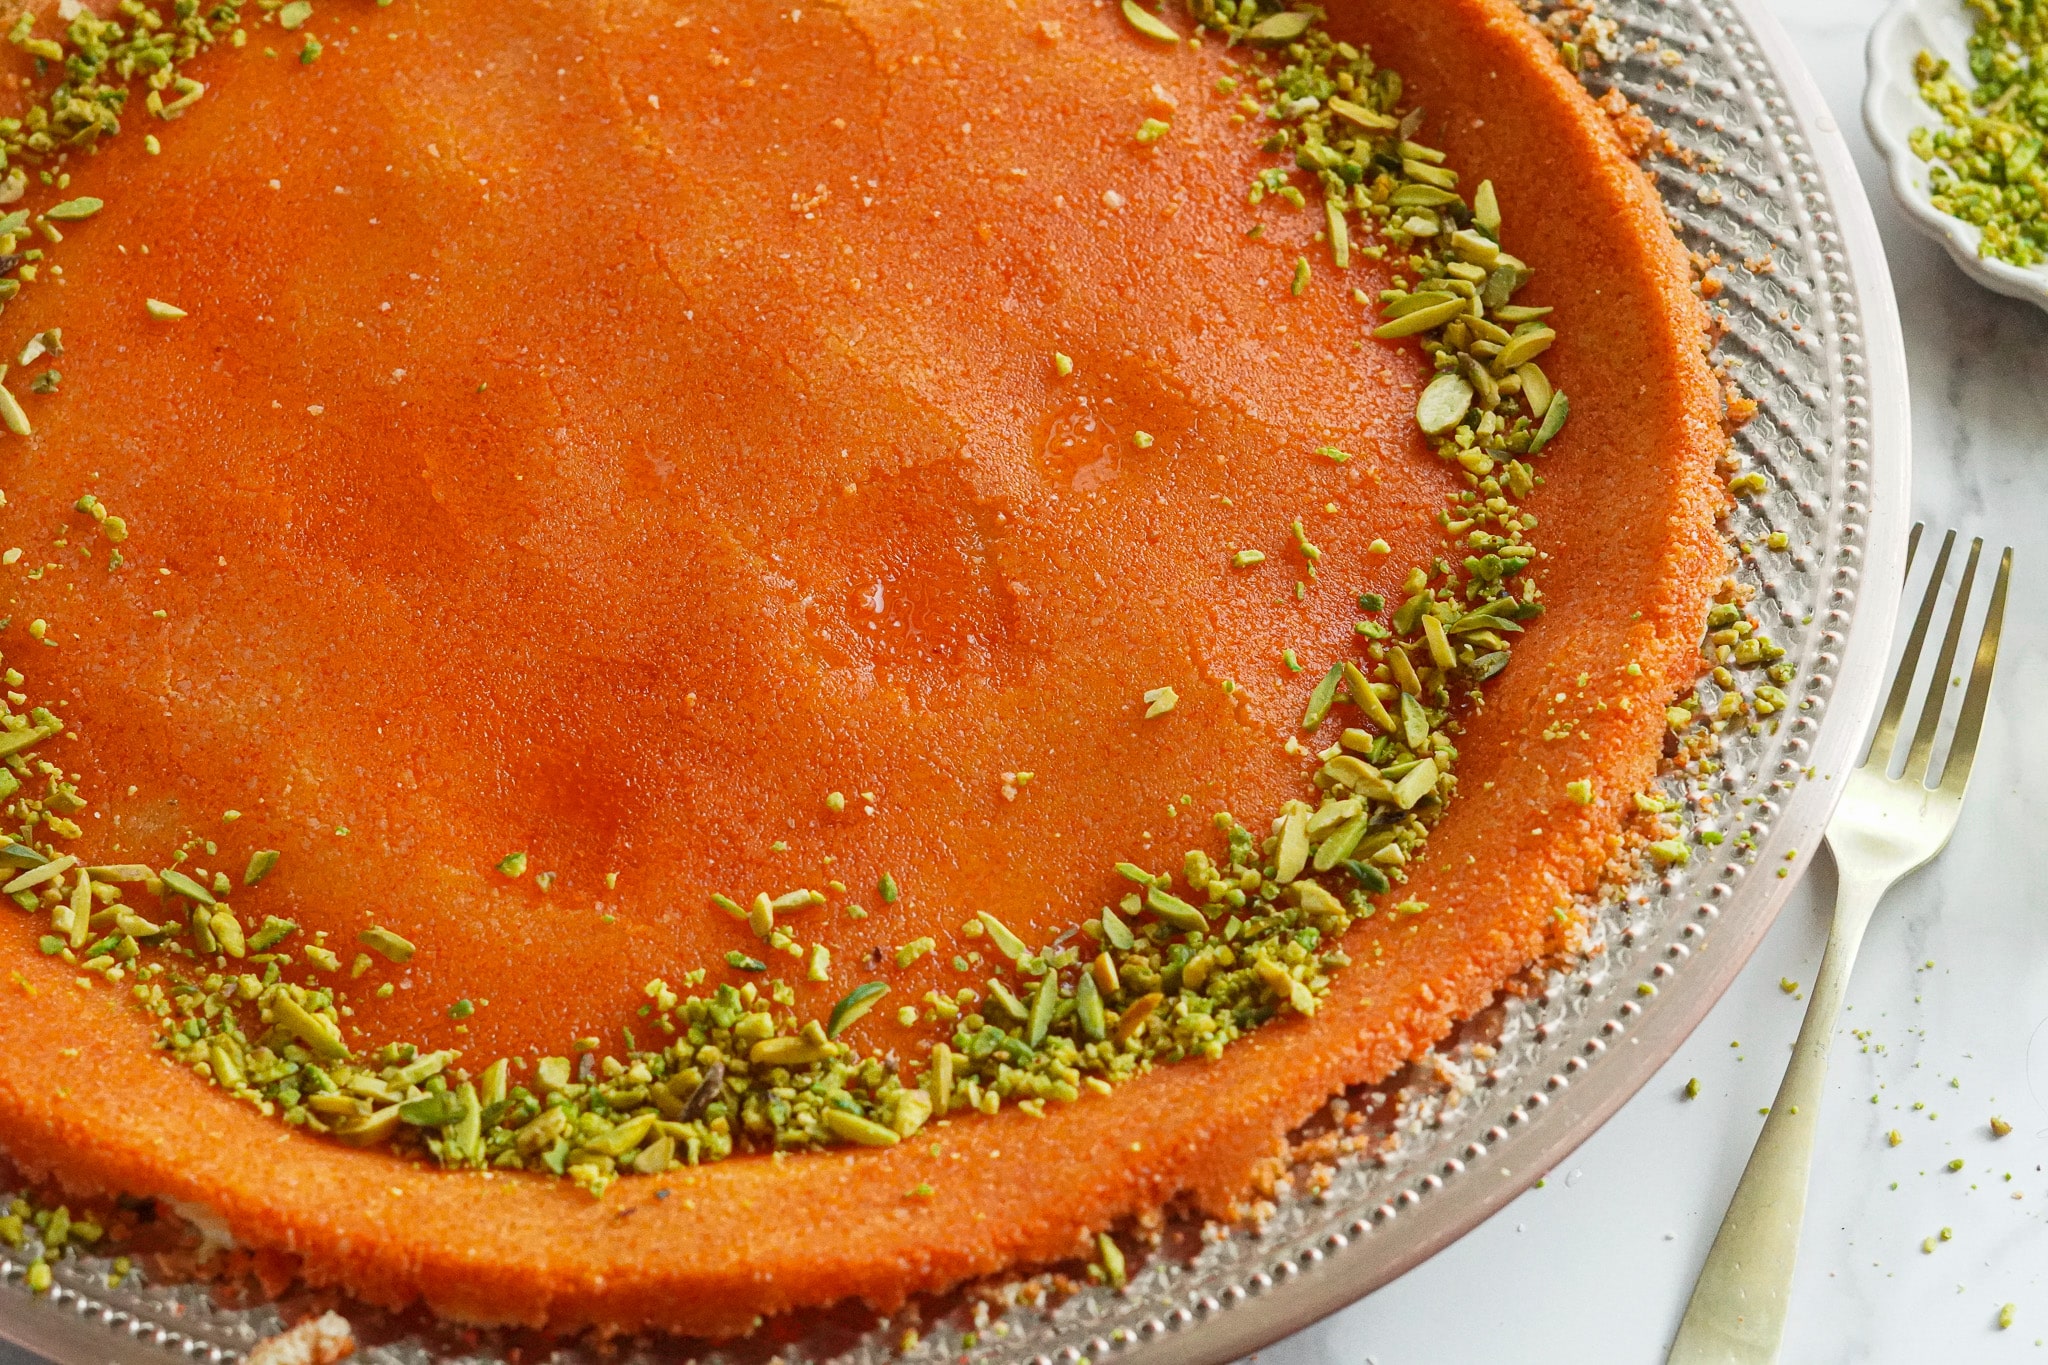 Palestinian knafeh na'ameh made with stretchy cheese, slightly crunchy dough, and simple syrup